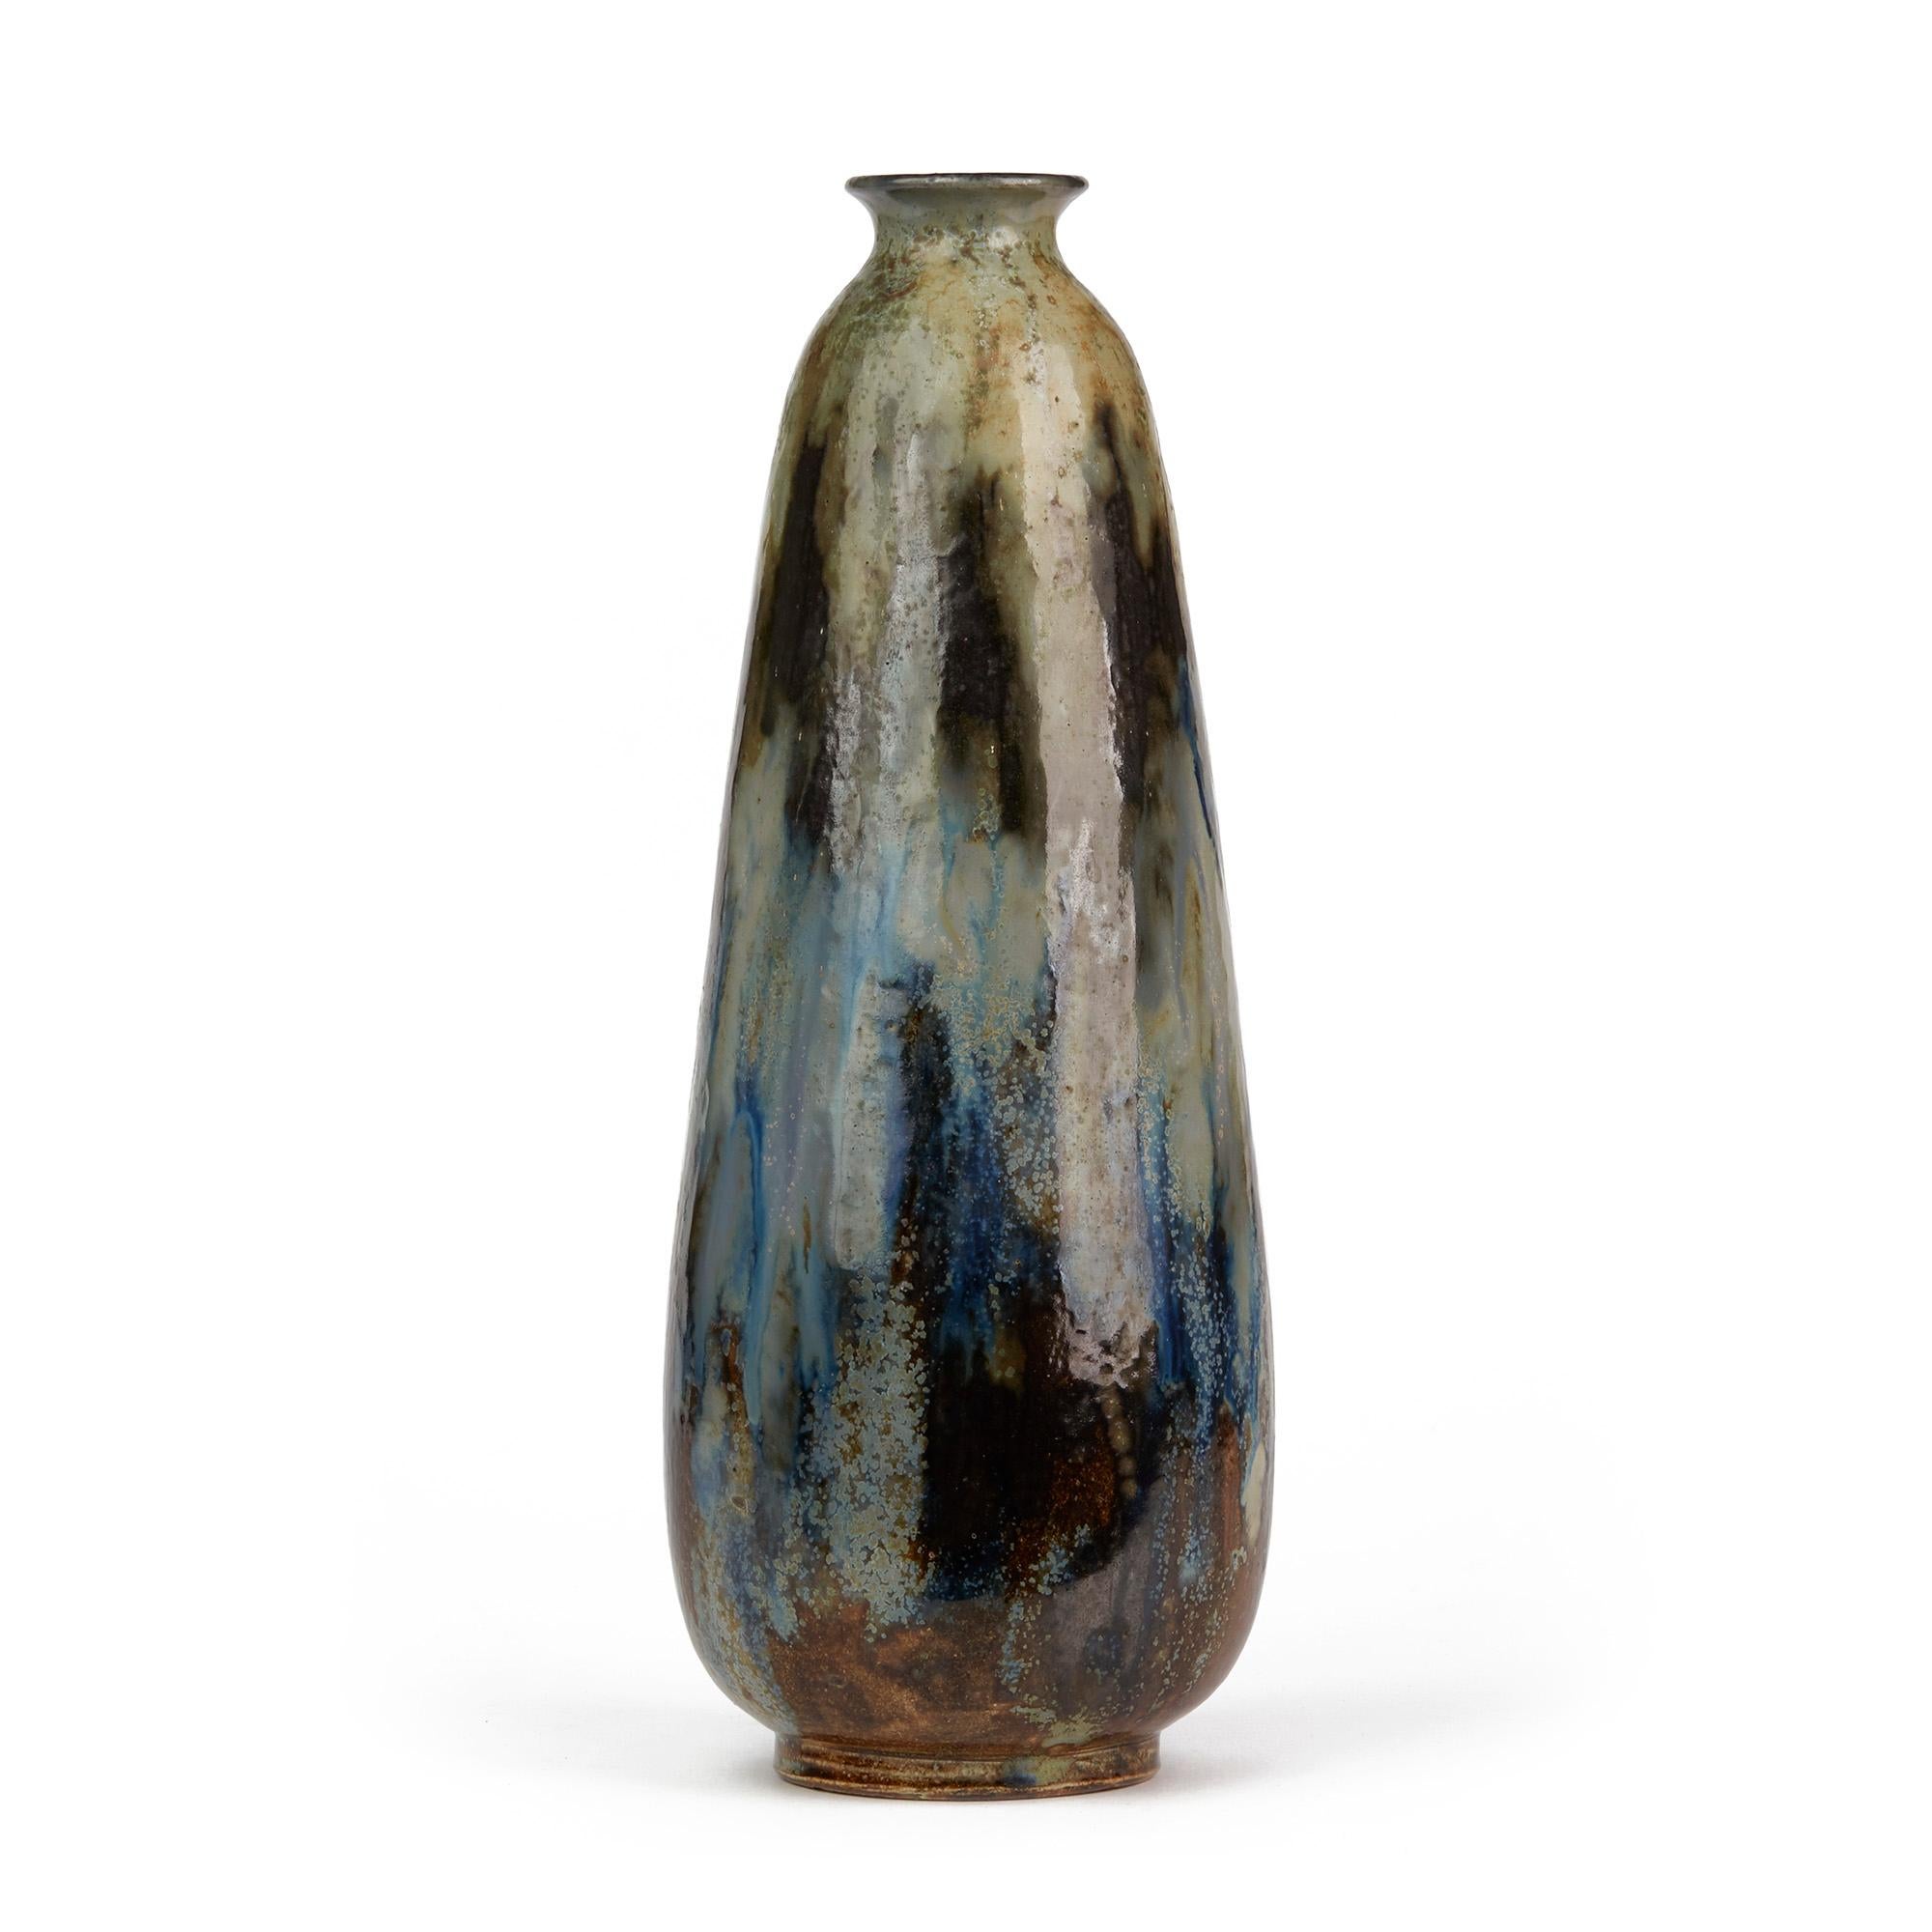 Roger Guérin Bouffioulx Exquisitely Glazed Tall Stoneware Art Vase, circa 1930 For Sale 2